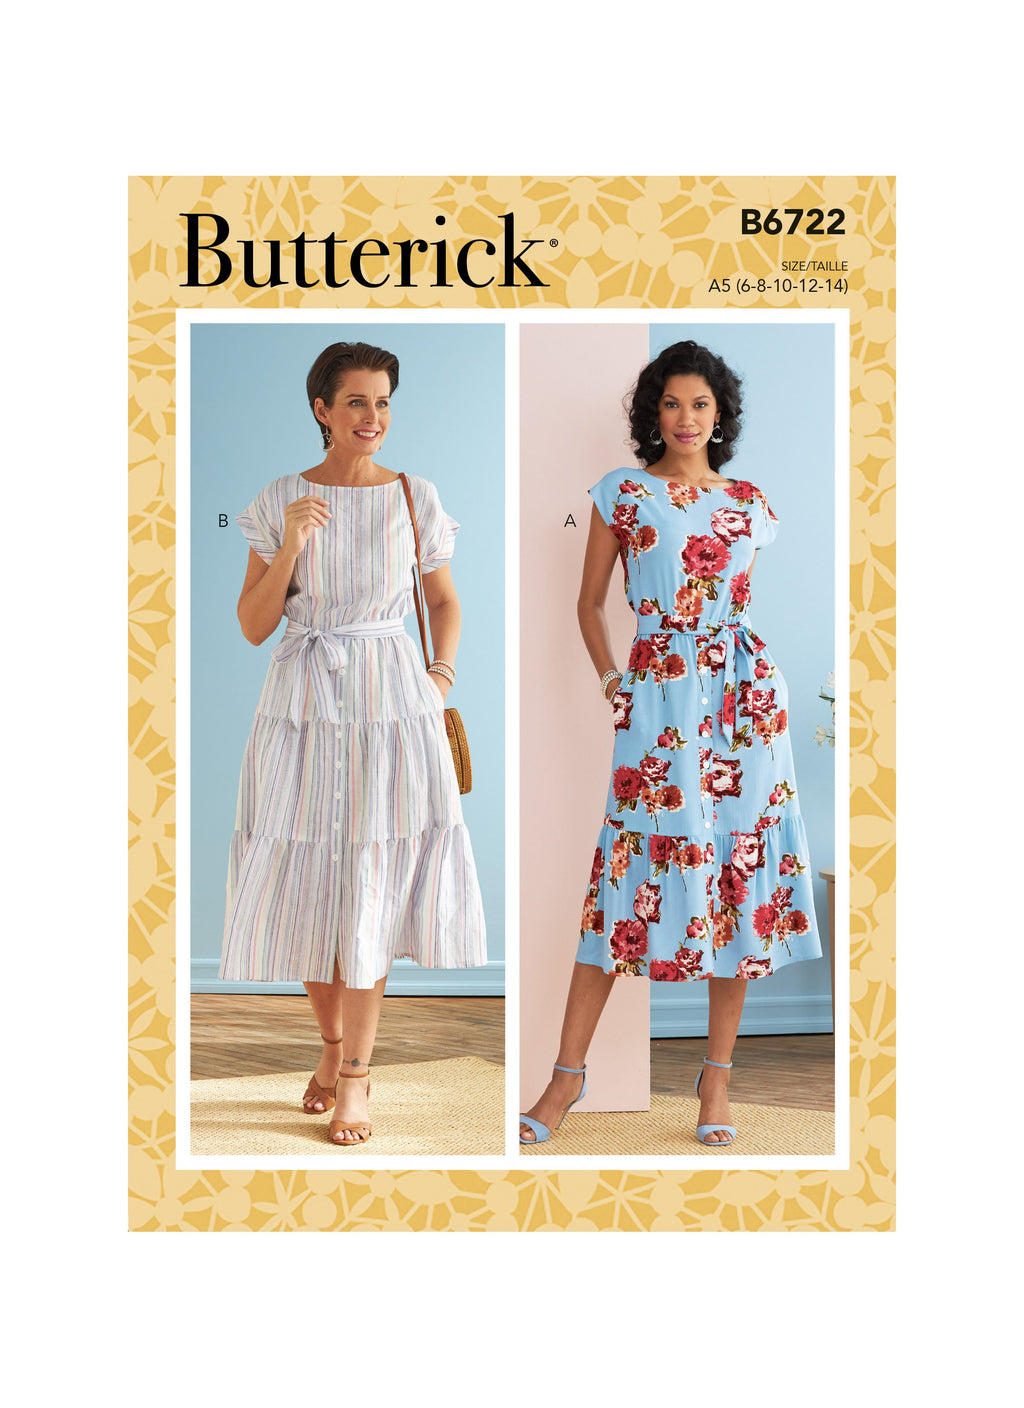 Butterick Sewing Pattern 6722 Misses' Dresses